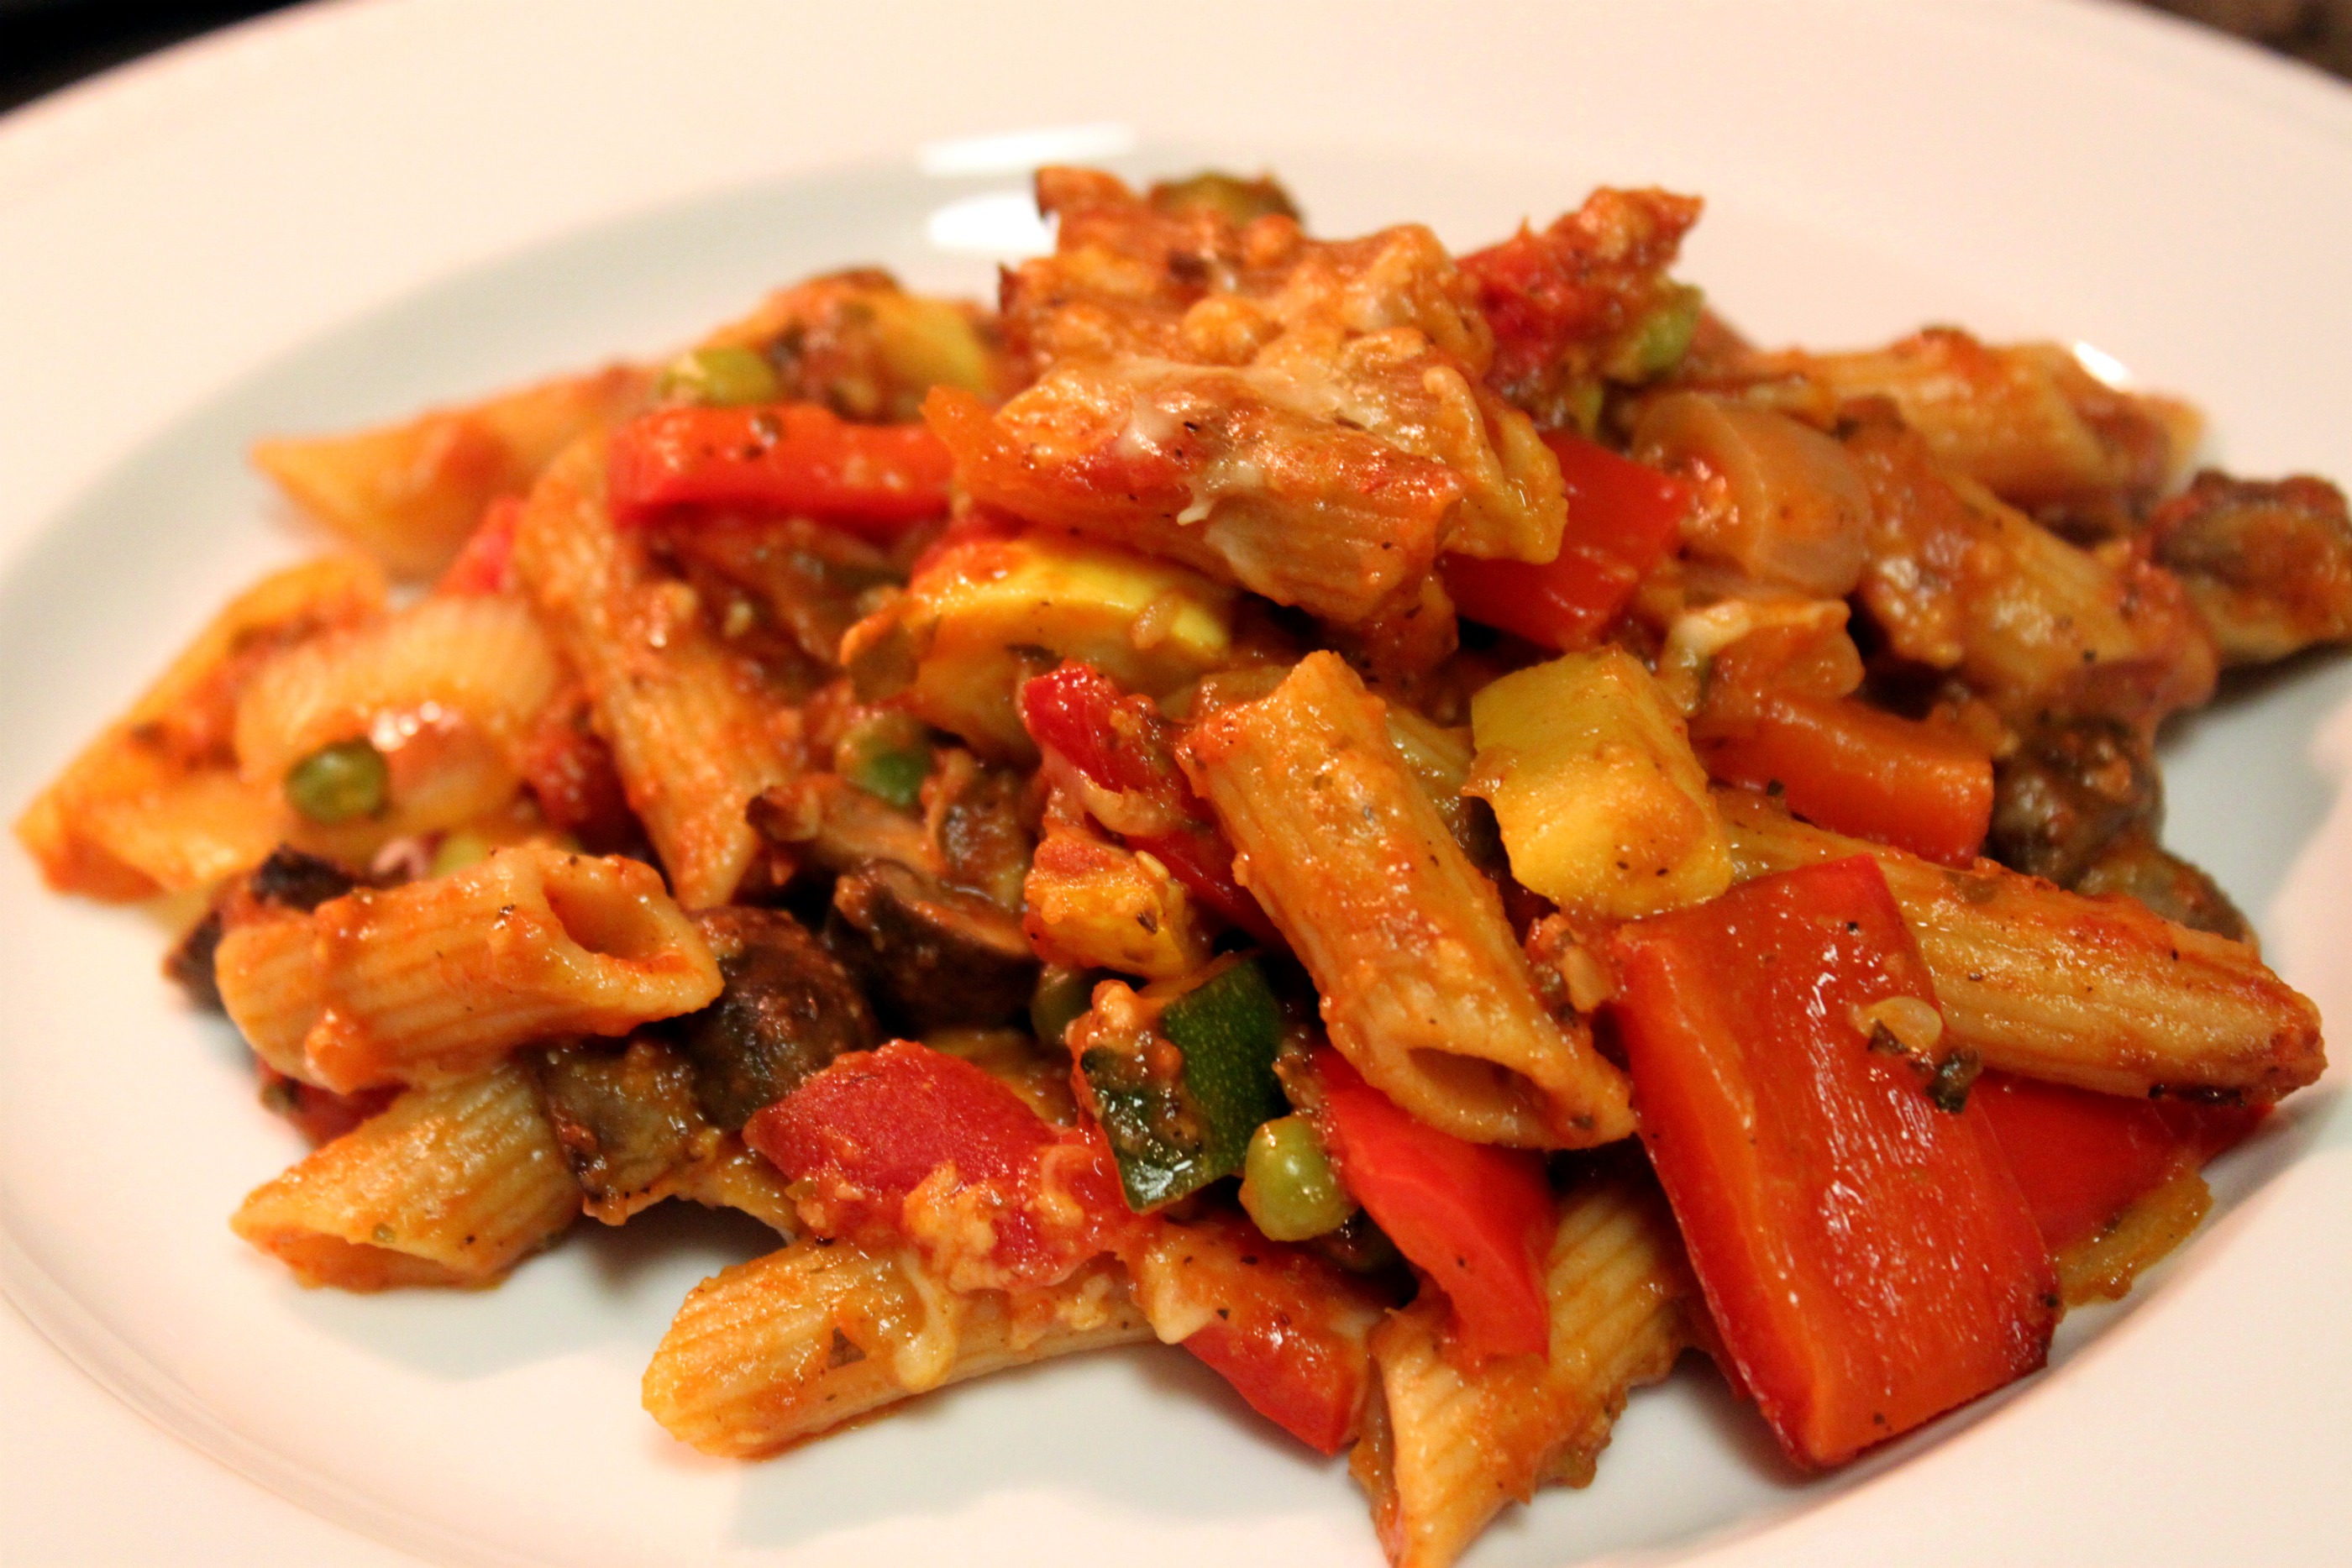 Baked Penne with Roasted Vegetables | Visititaly.info